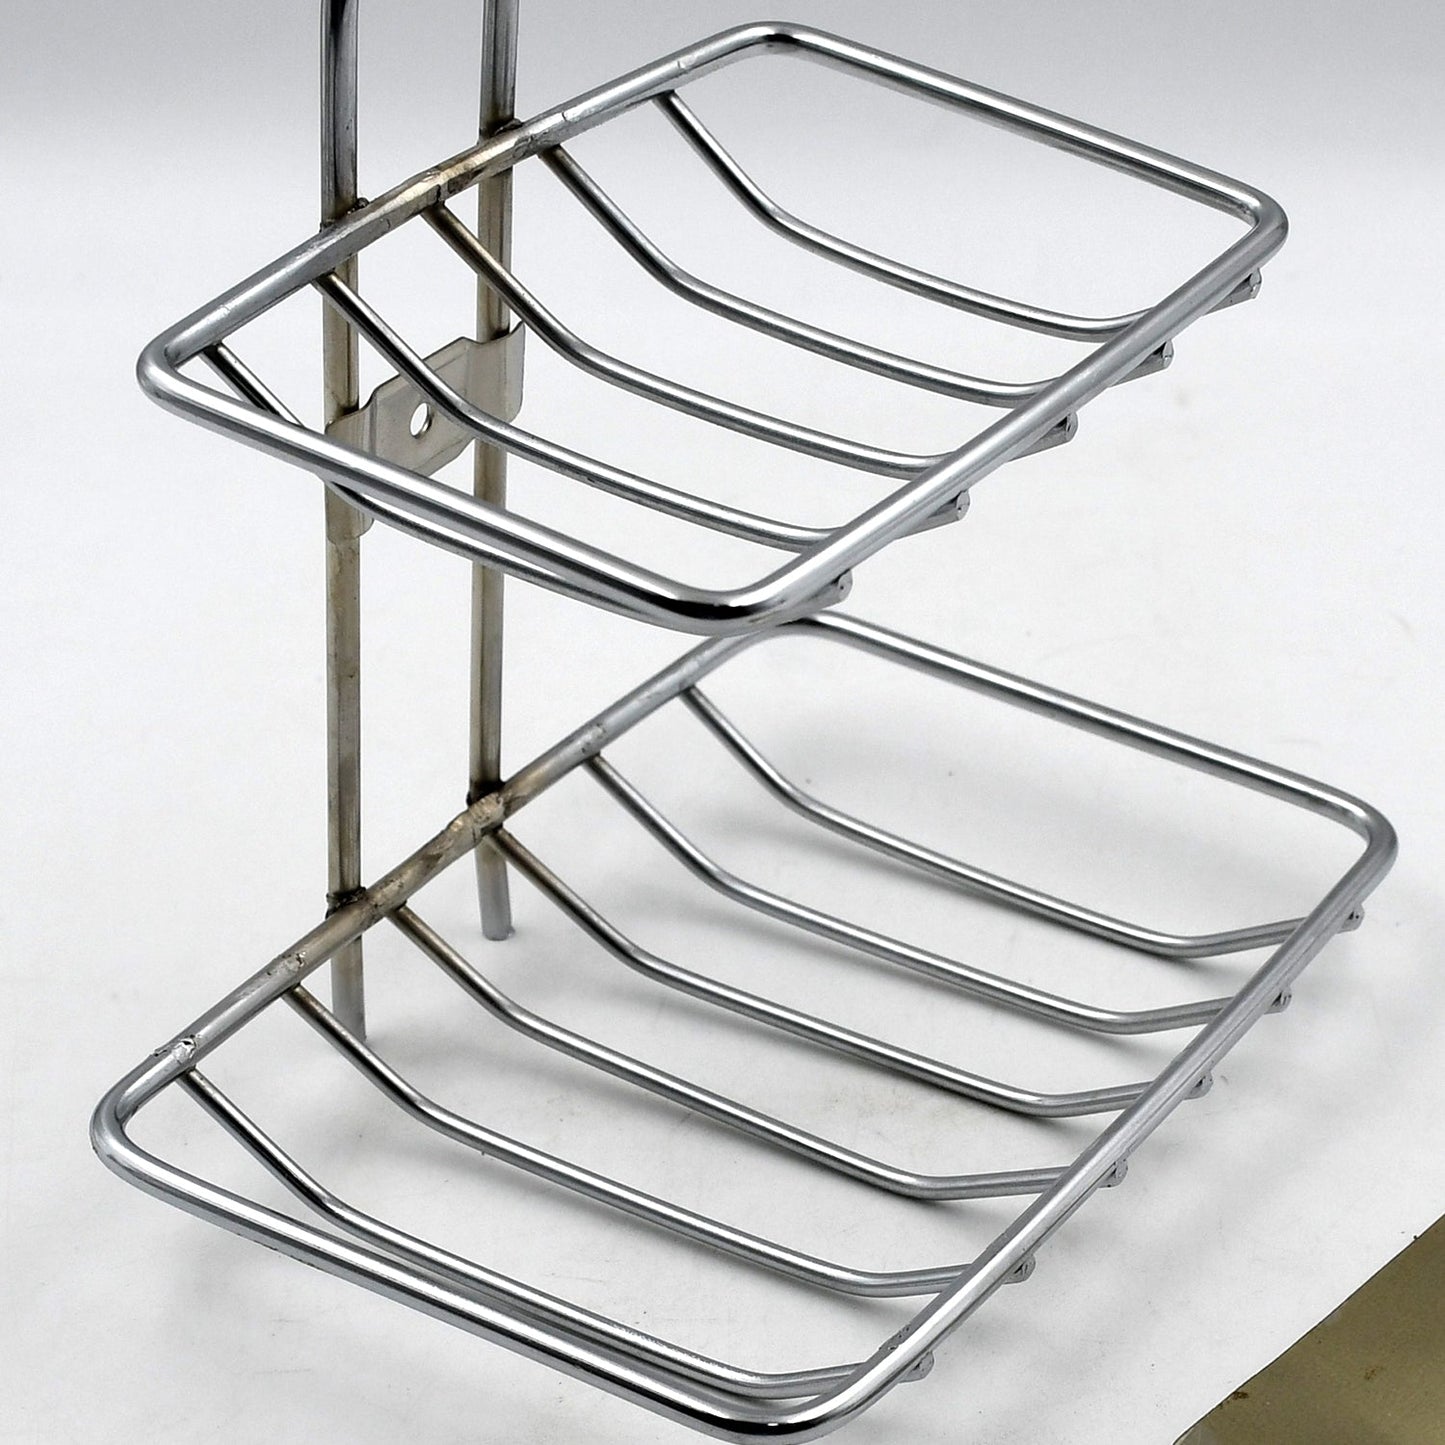 Kitchen, Bathroom Stainless Steel Wall Mounted Double Layer Self Adhesive Magic Sticker Soap Dish Holder Wall Hanging Soap Storage Rack  Used In All Kinds Of Places Household And Bathroom Purposes For Holding Soaps.